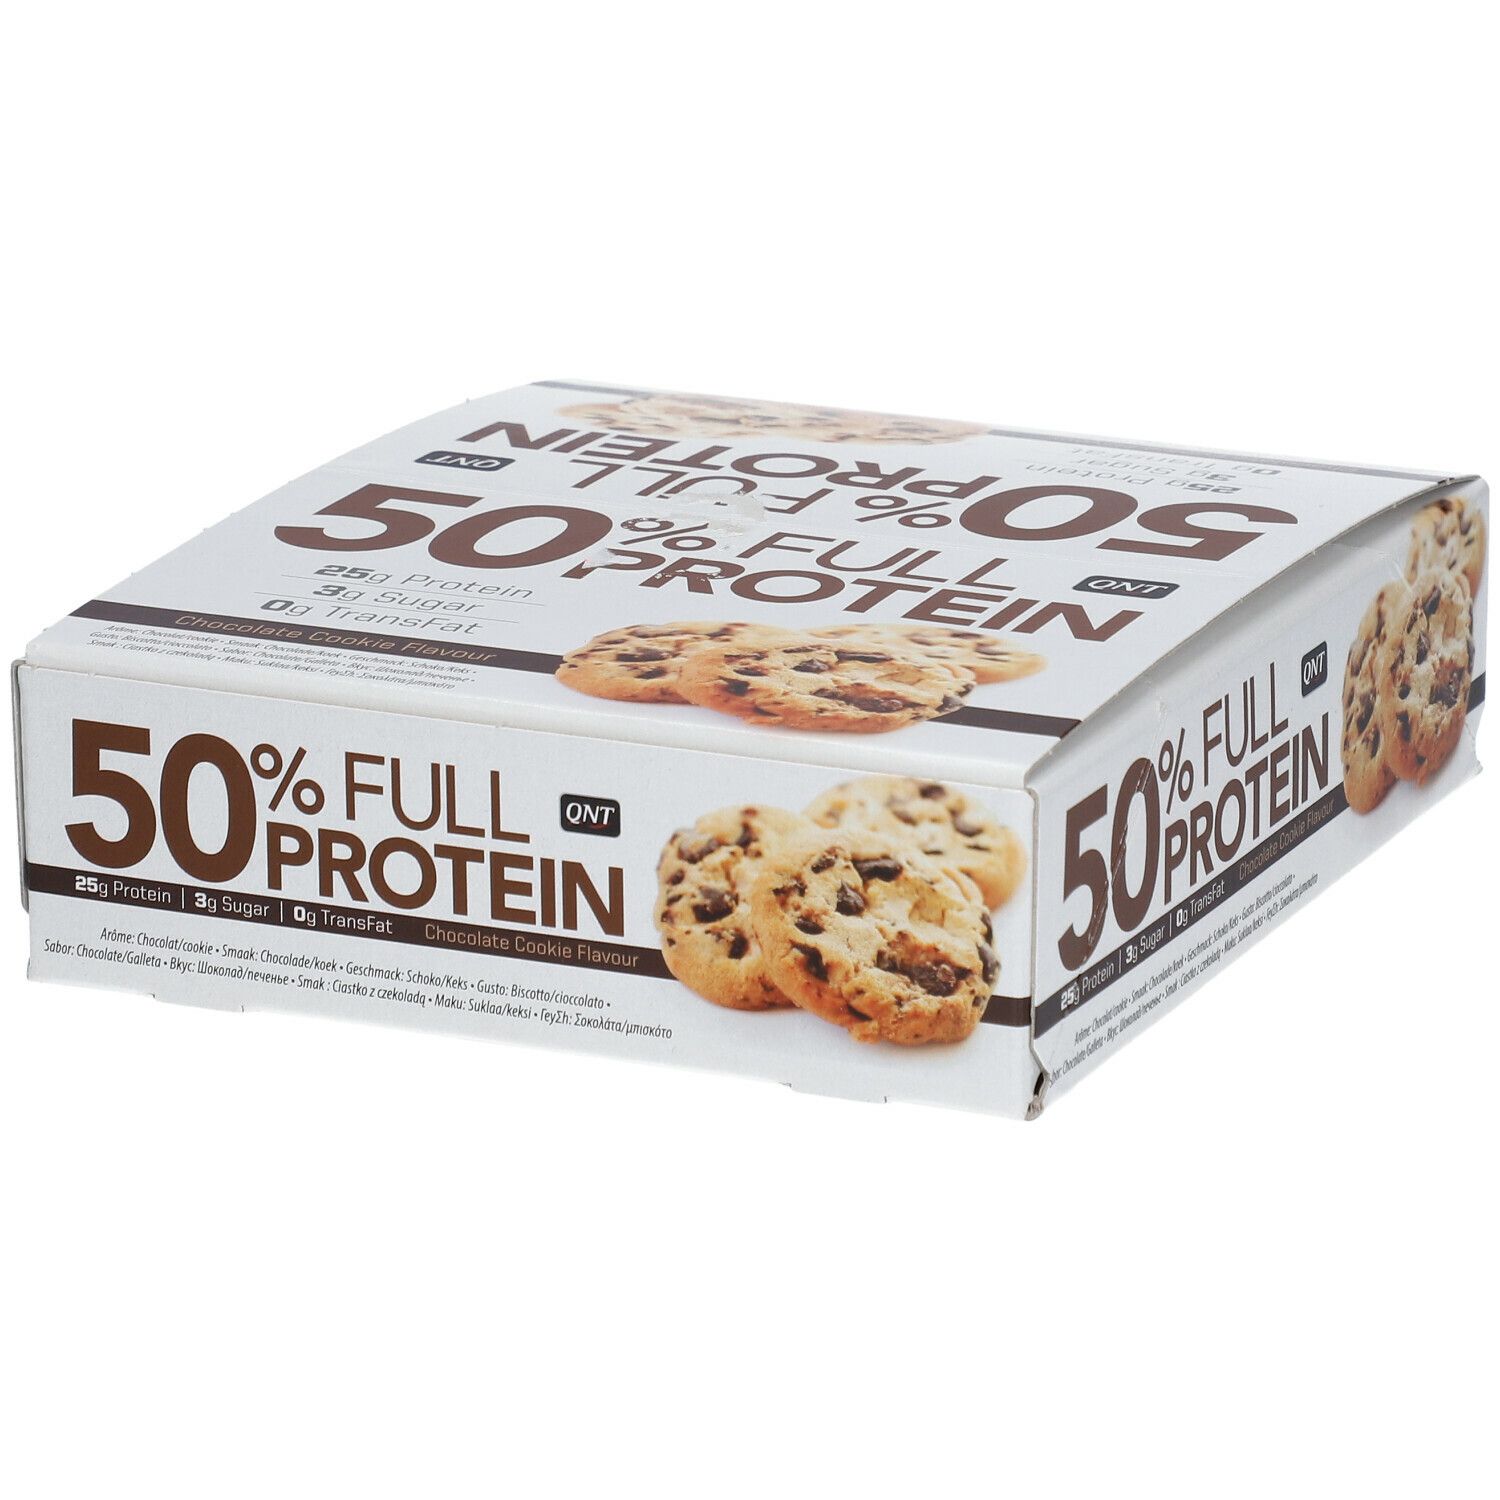 Image of QNT 50% Full Proteinbar Chocolate Cookie